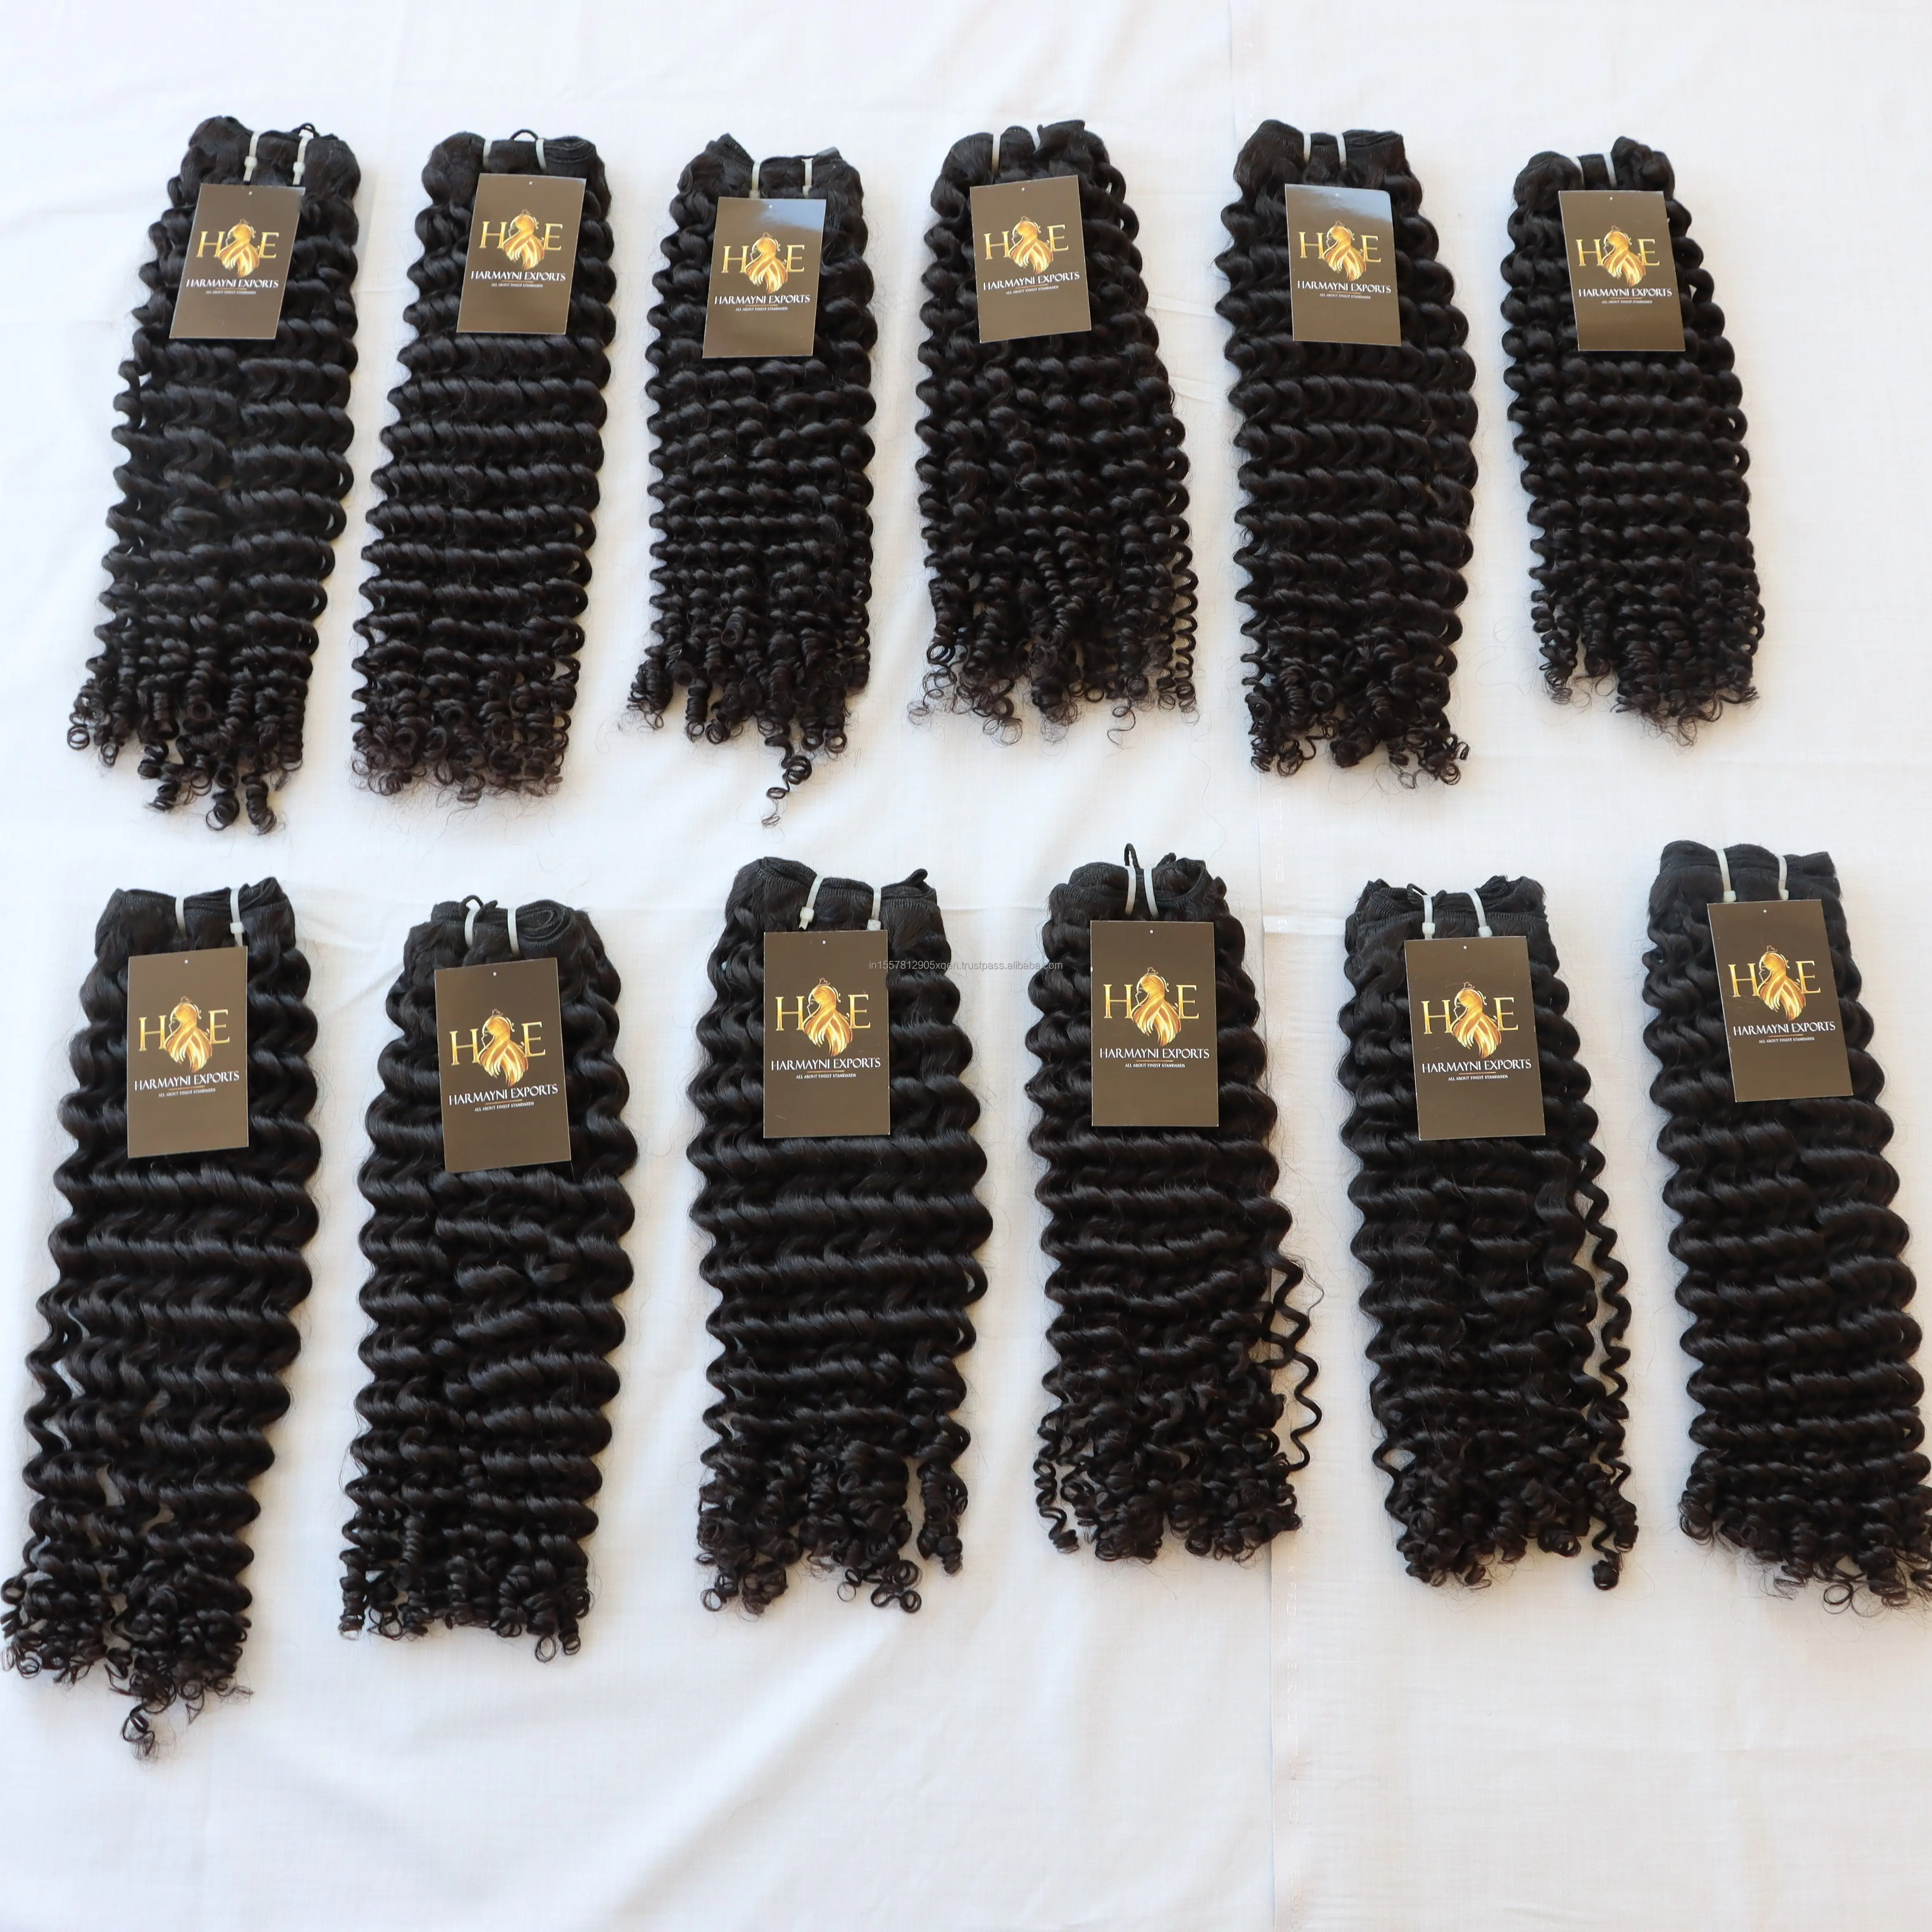 100% Unprocessed Raw Indian Temple Virgin Human Hair Bundle 12A Grade Wavy Curly Bundle with Closure Frontal